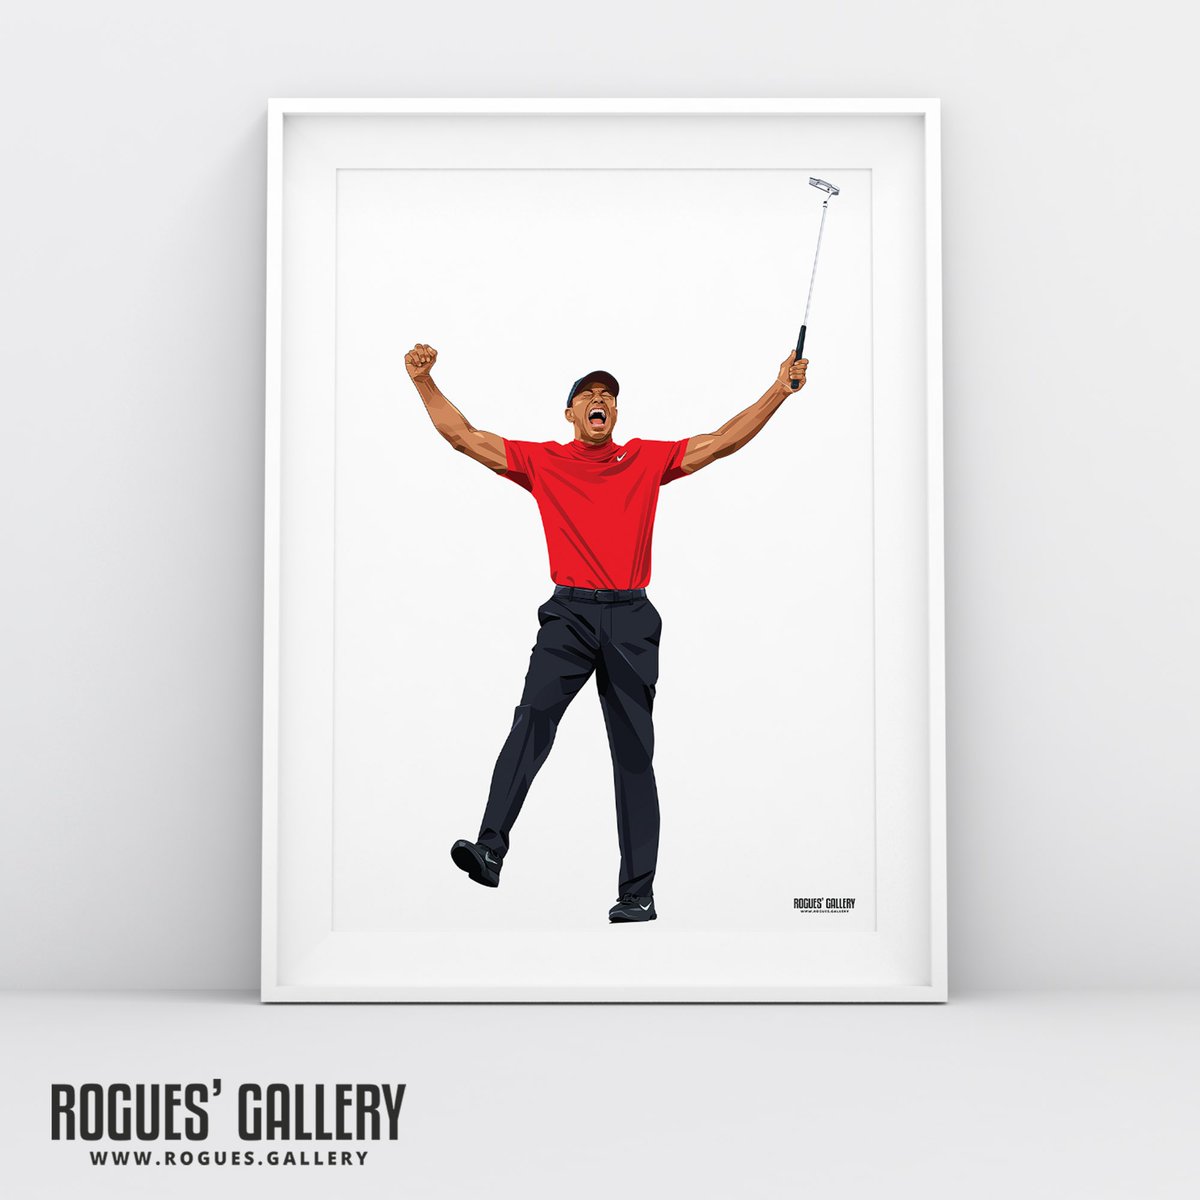 Something completely different that was specially commissioned. A first golf design, fittingly of Tiger Woods in the Ryder Cup. ⛳️ Available now in 3 different styles & all sizes #tigerwoods #art #golf rogues.gallery 👀